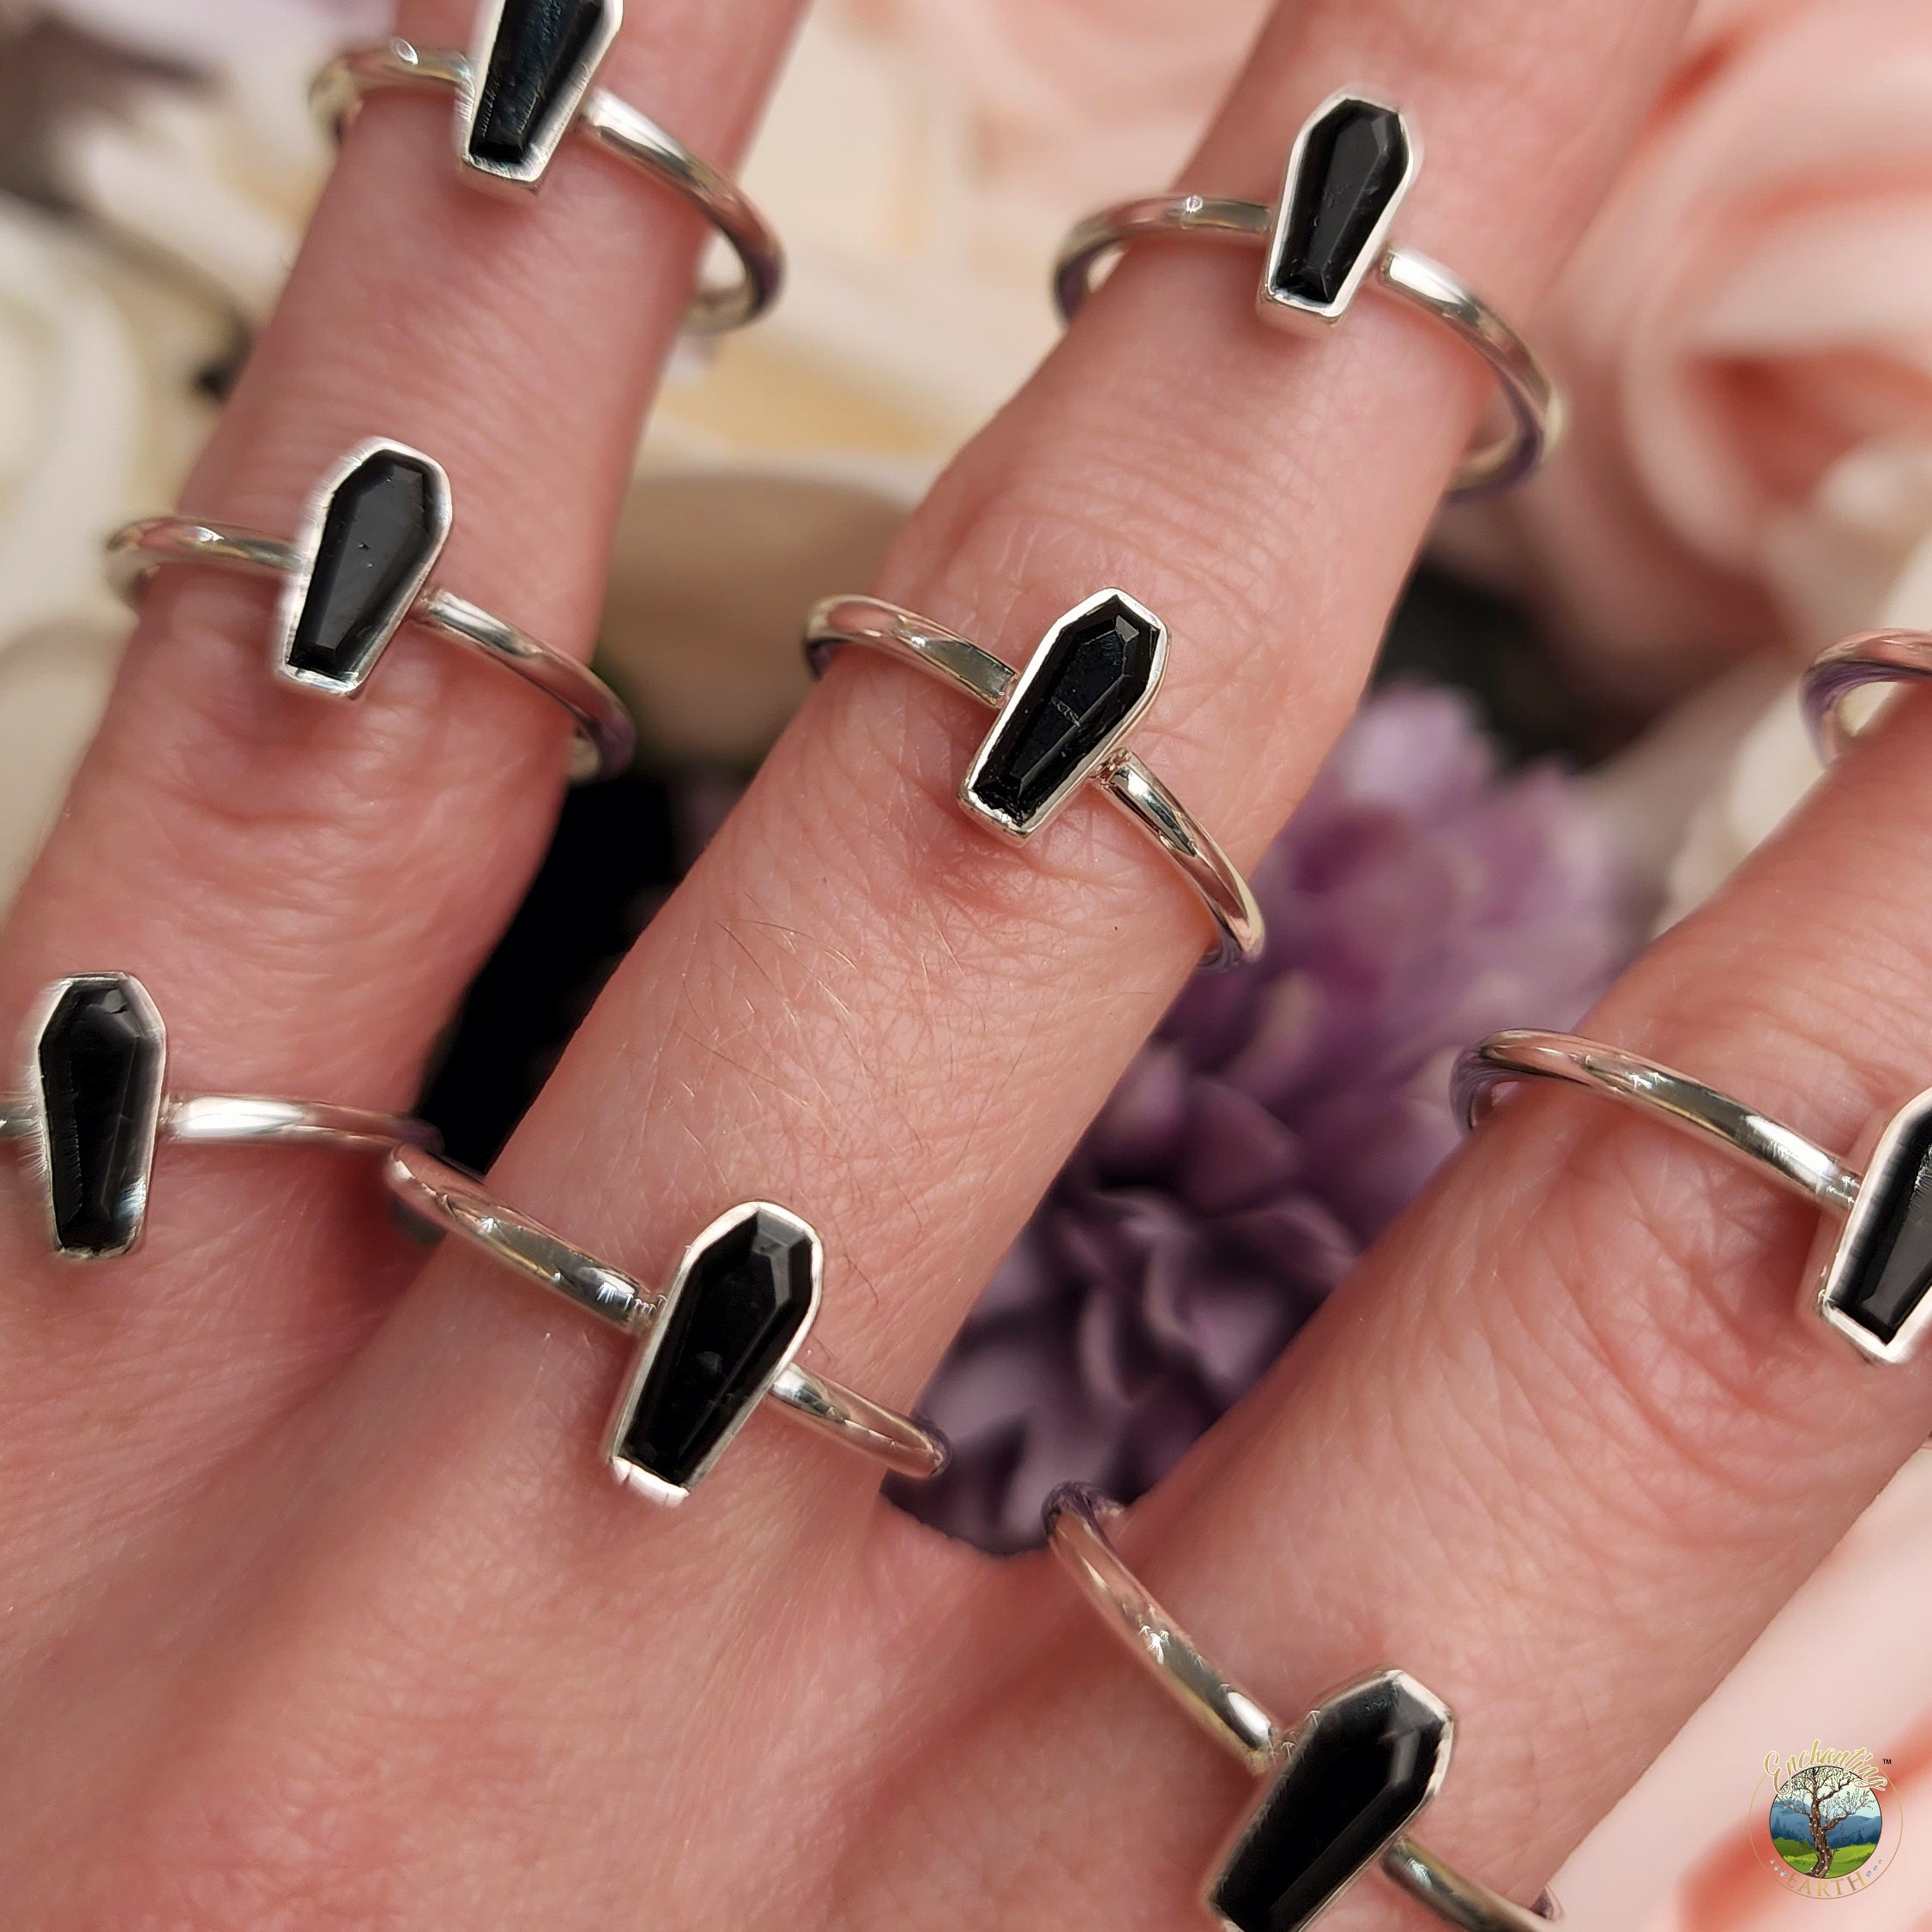 Black Tourmaline Coffin Dainty Ring .925 Silver for Protection